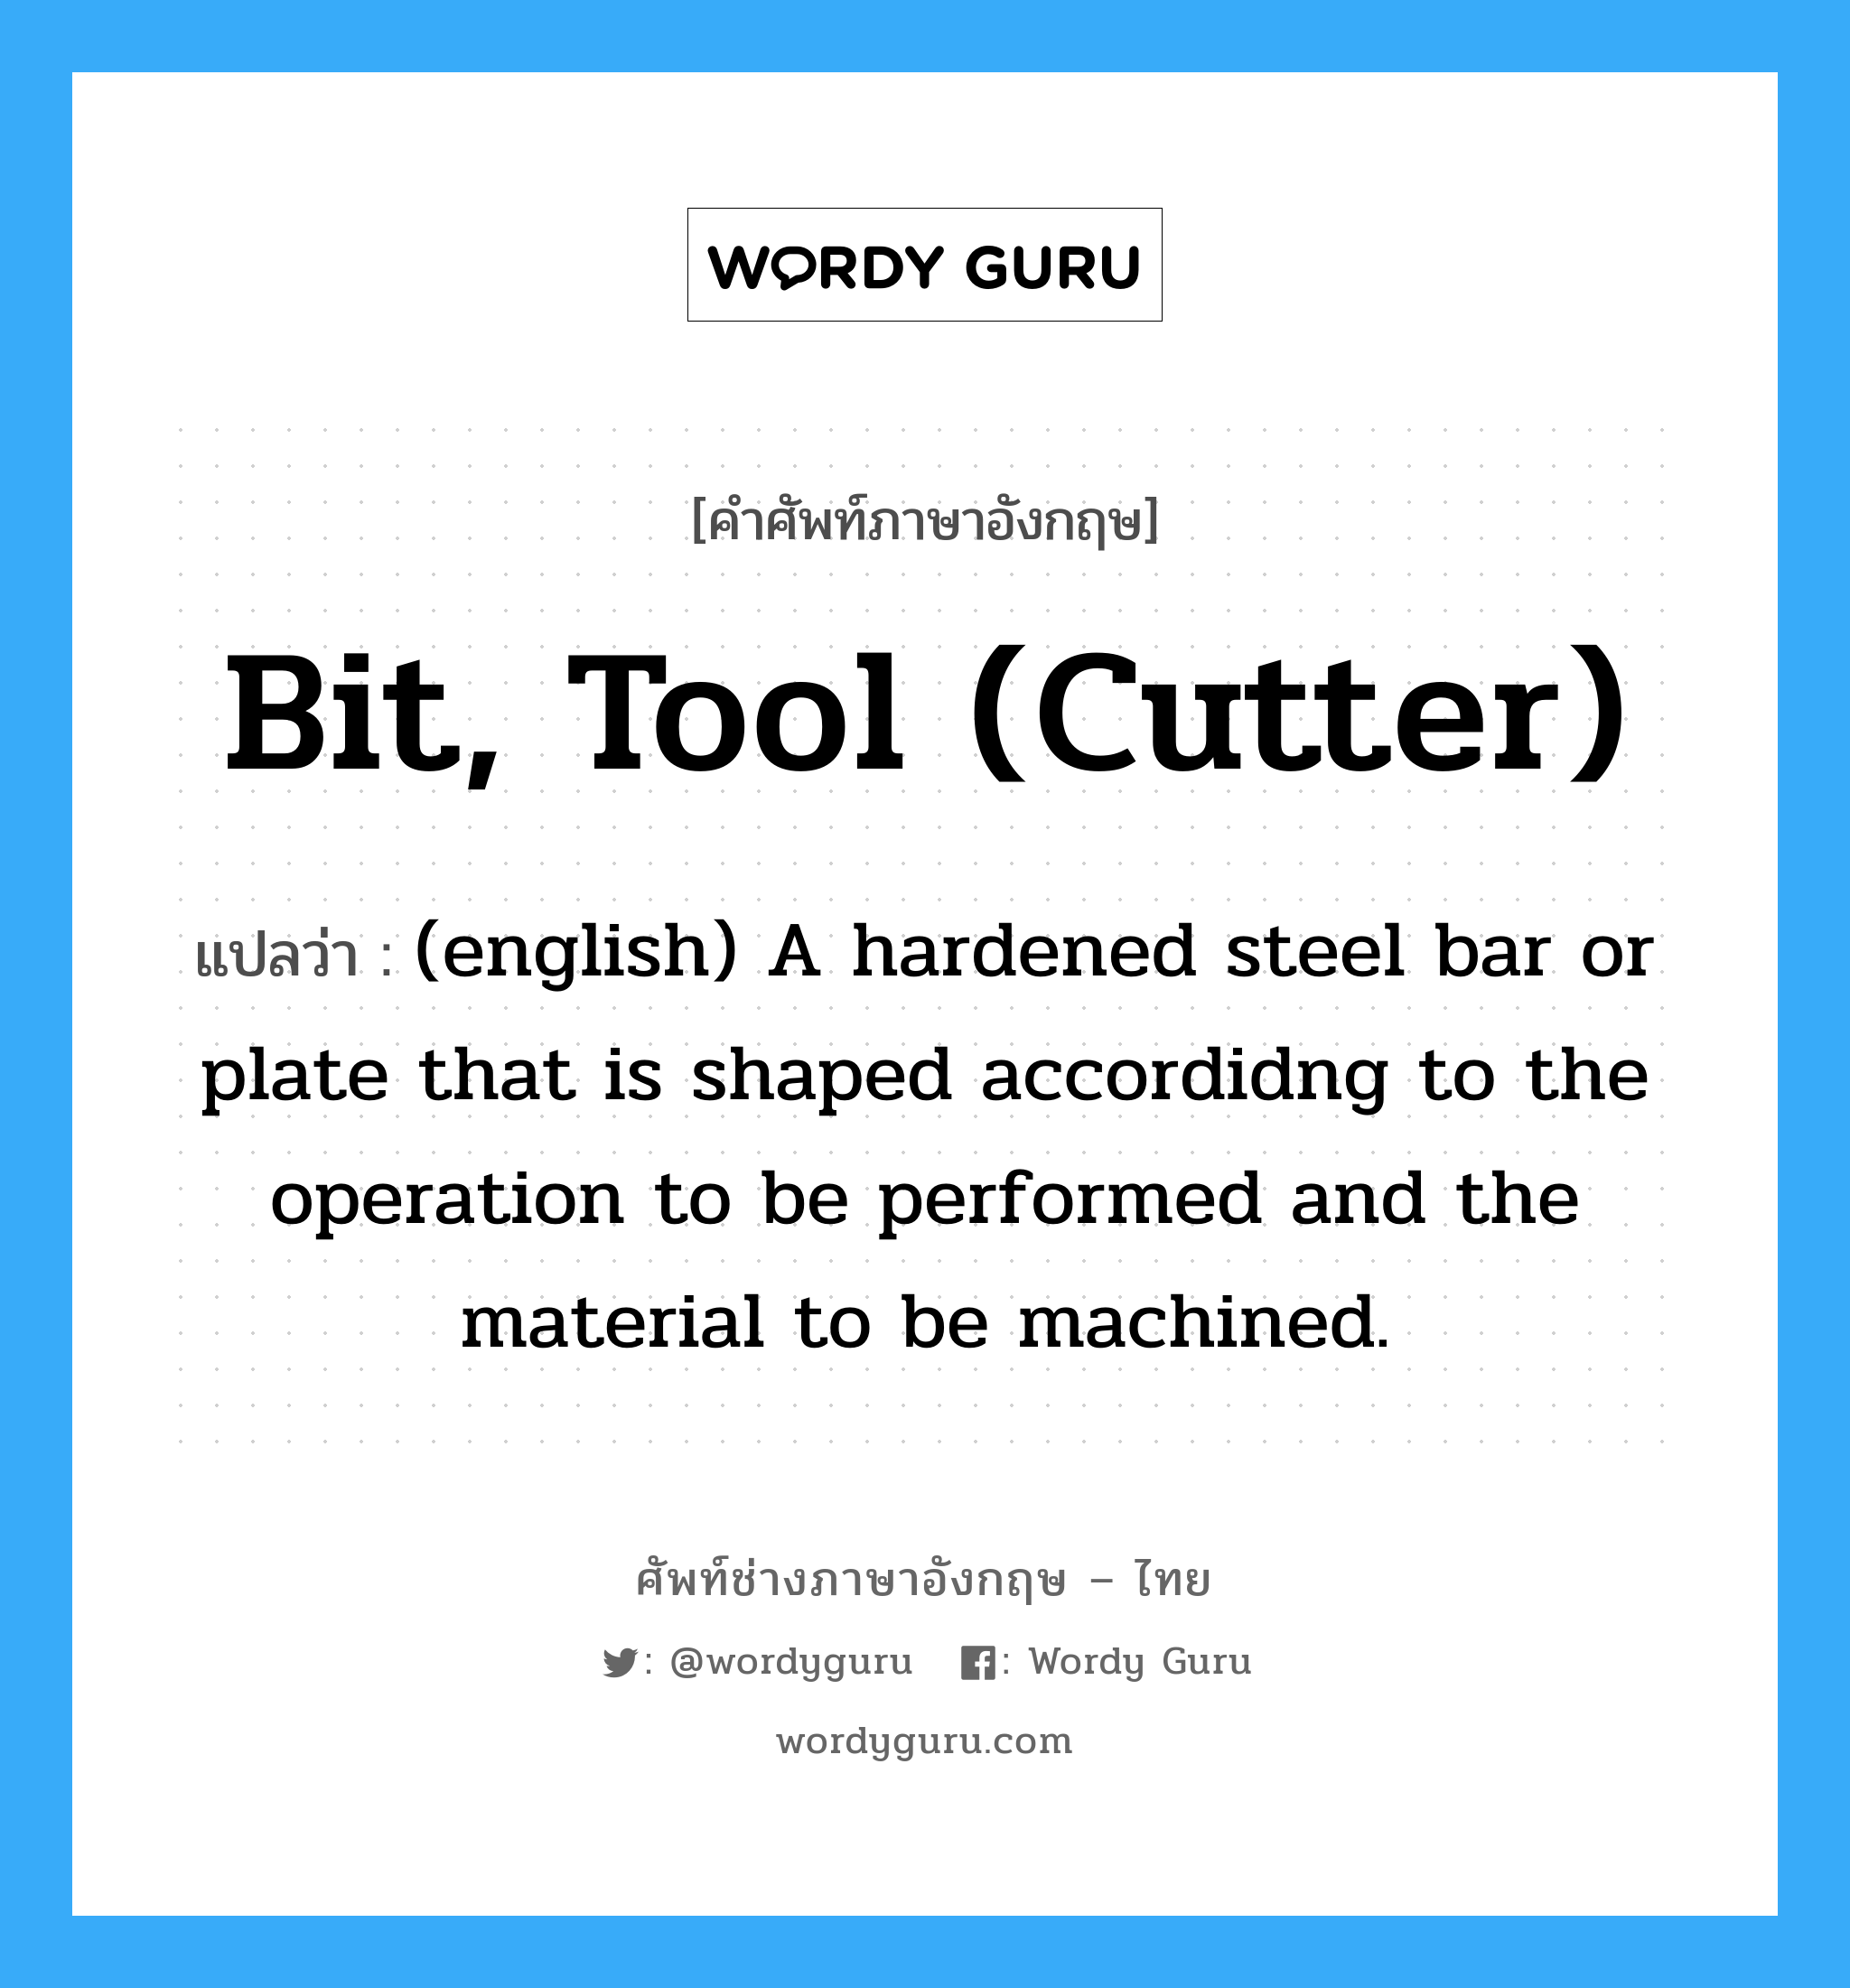 Bit, Tool (cutter) แปลว่า?, คำศัพท์ช่างภาษาอังกฤษ - ไทย Bit, Tool (cutter) คำศัพท์ภาษาอังกฤษ Bit, Tool (cutter) แปลว่า (english) A hardened steel bar or plate that is shaped accordidng to the operation to be performed and the material to be machined.